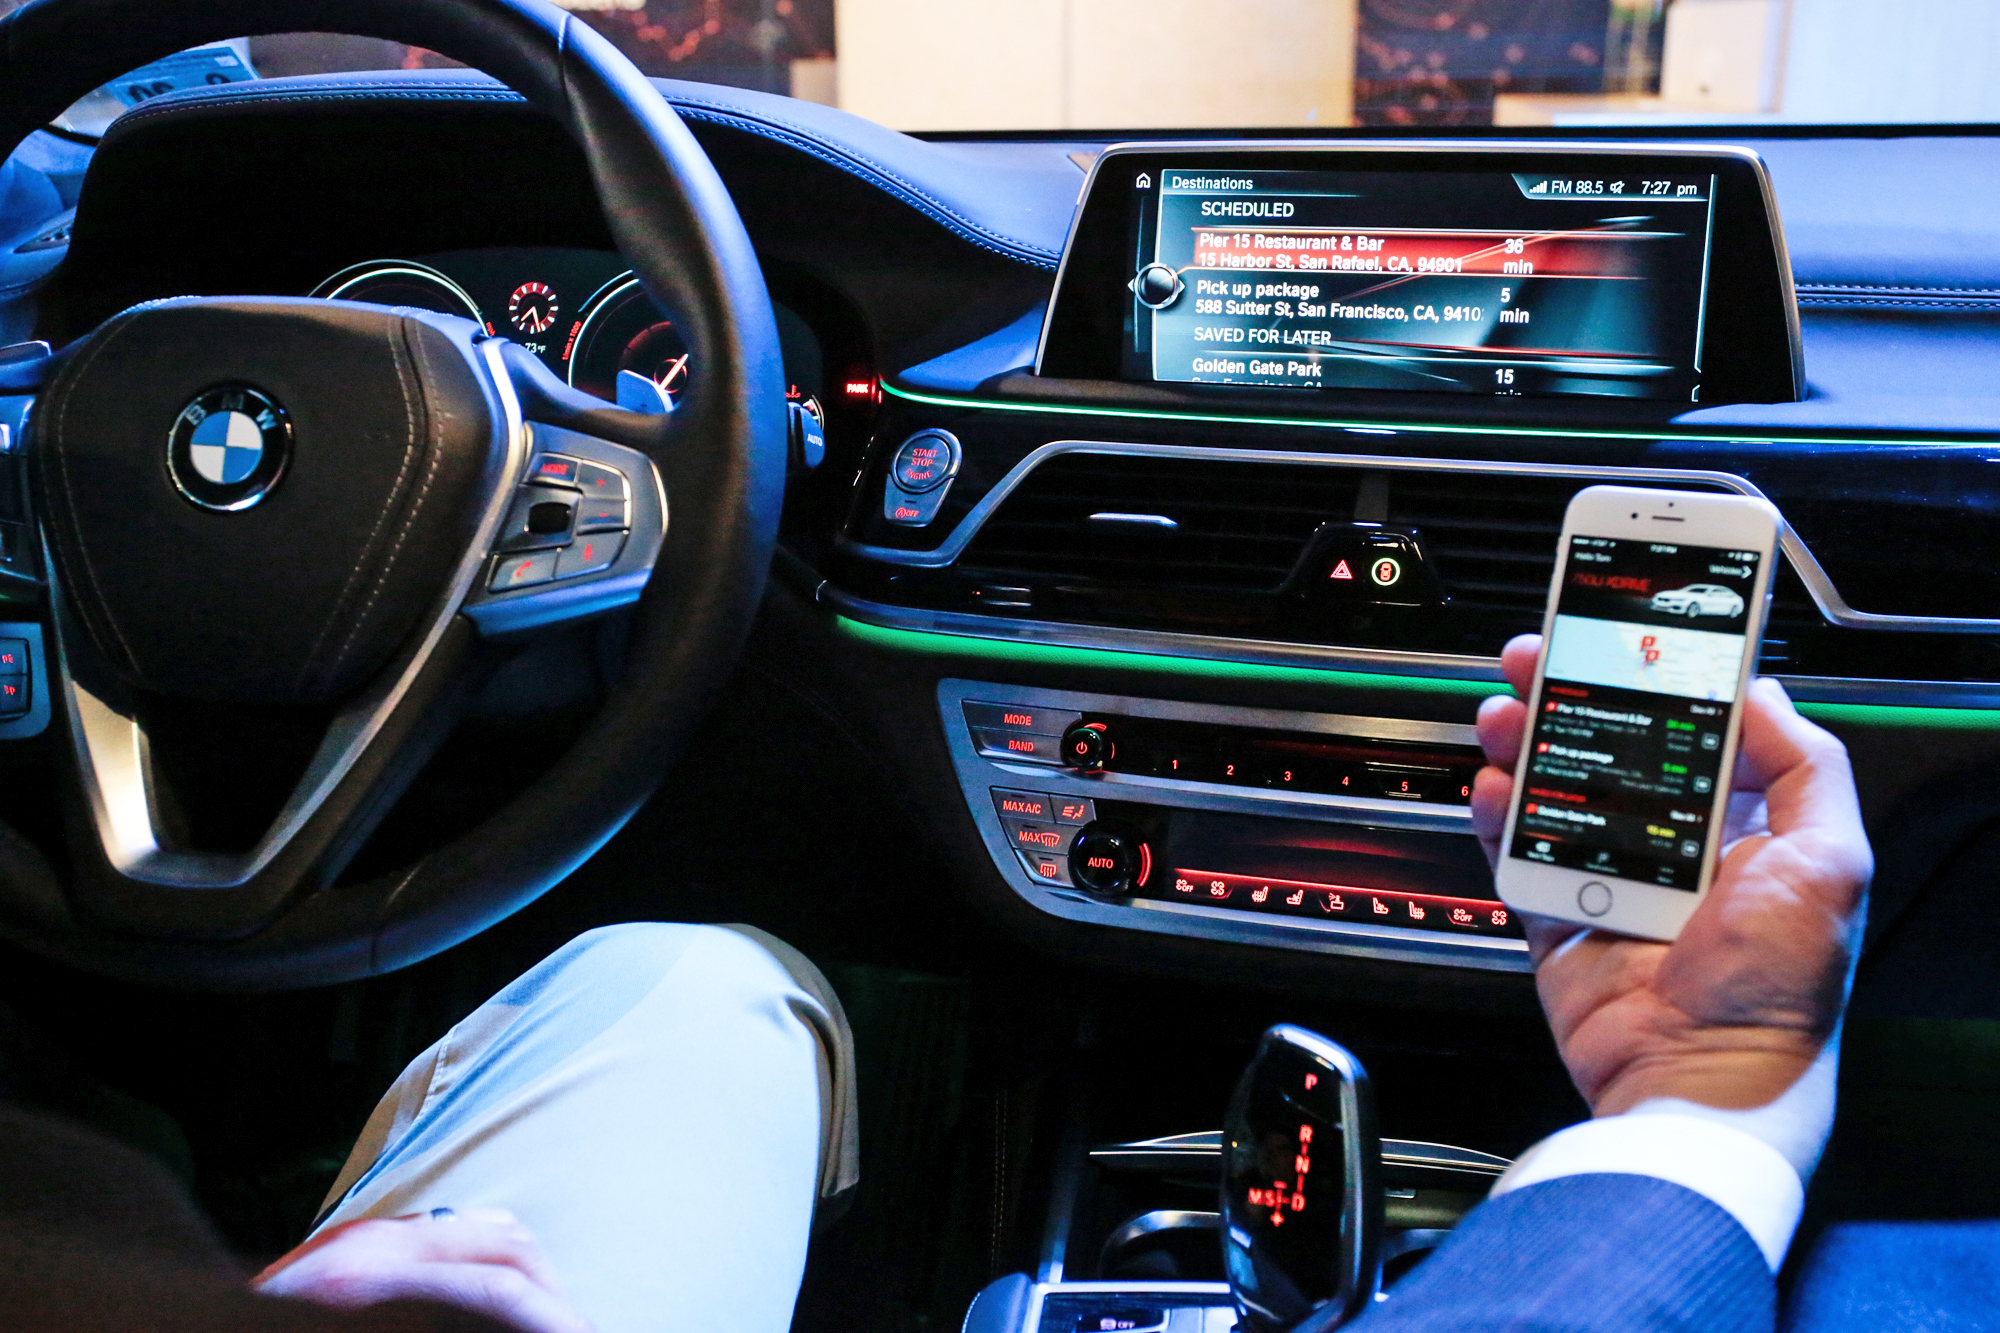 BMW gets into the virtual assistant game with its ConnectedDrive app